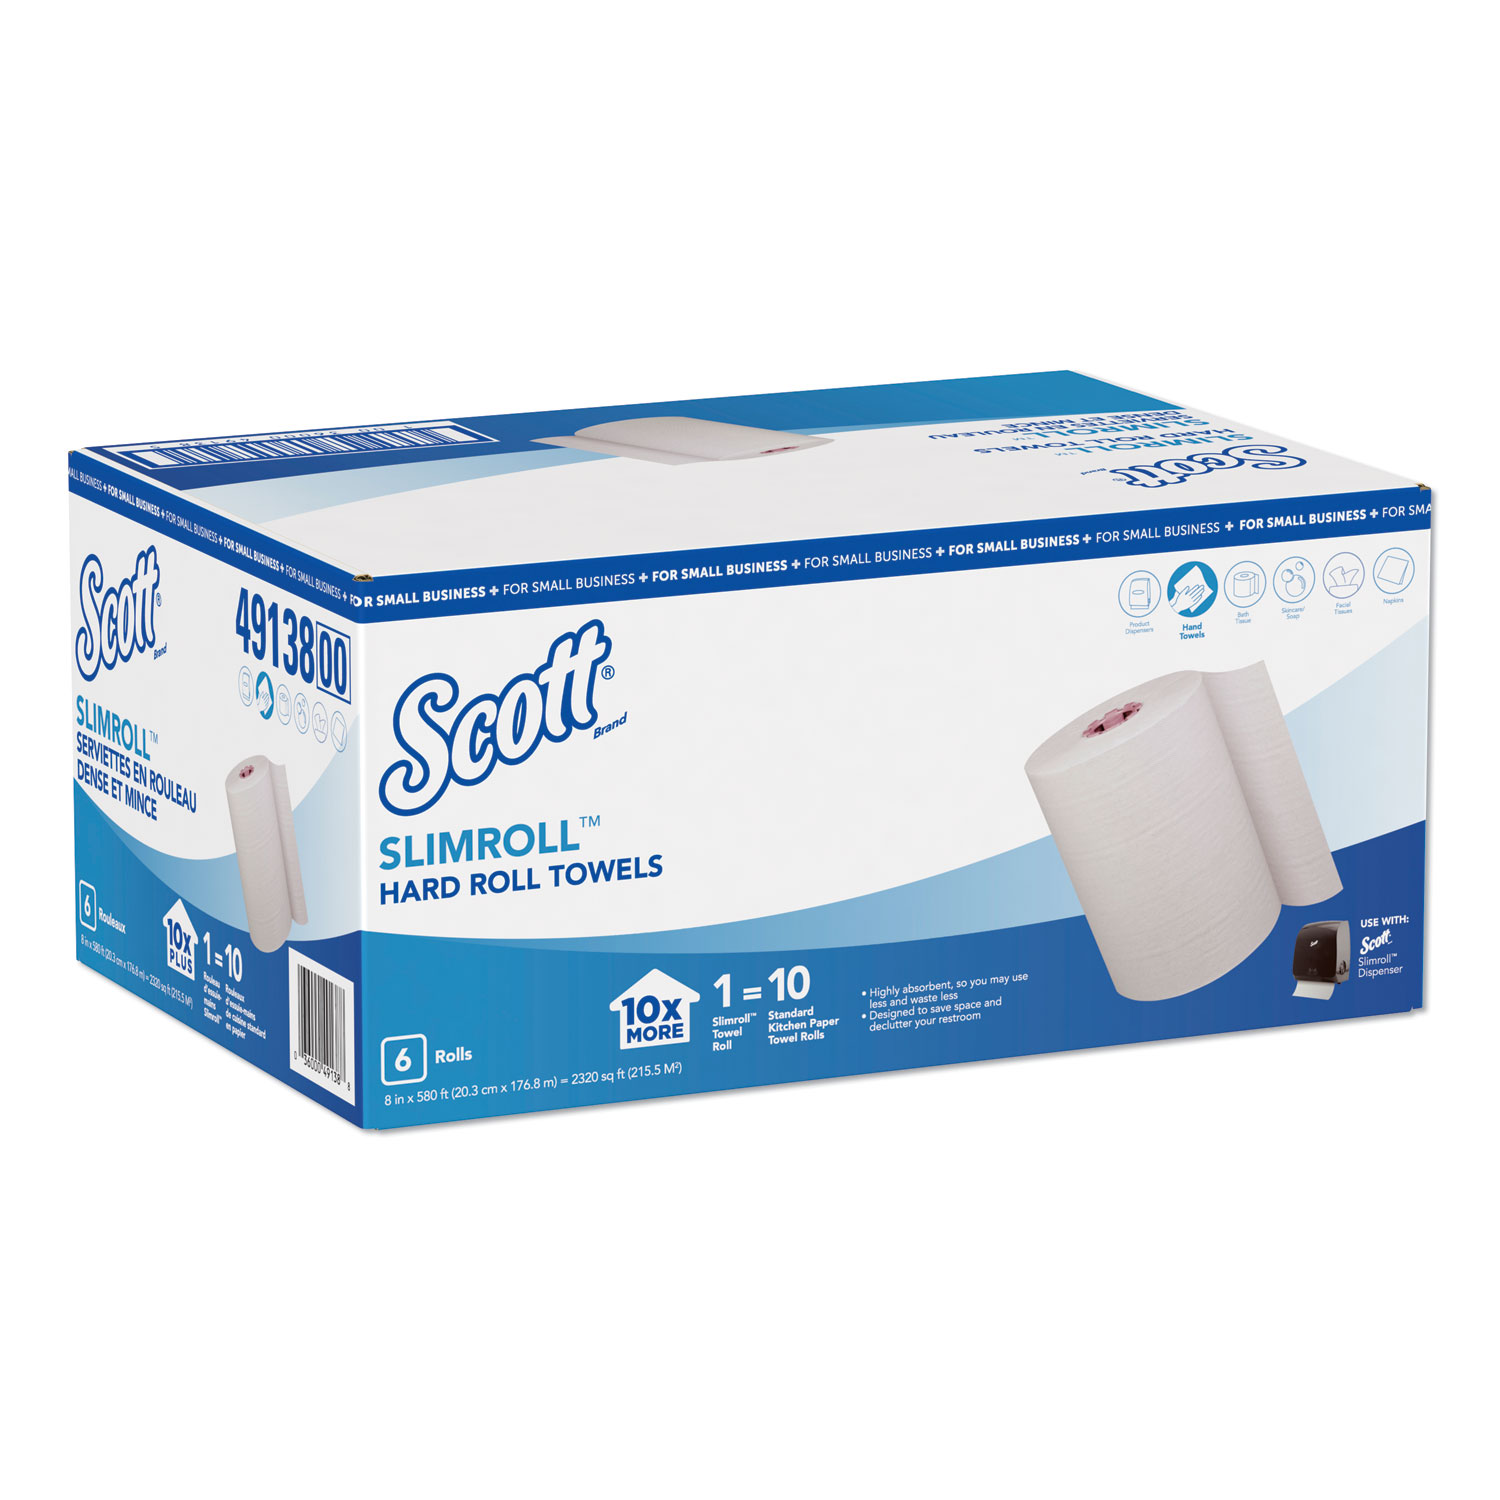  Scott 49138 Control Slimroll Towels, 8 x 580 ft, White/Pink Core,Small Business, 6 Rolls/CT (KCC49138) 